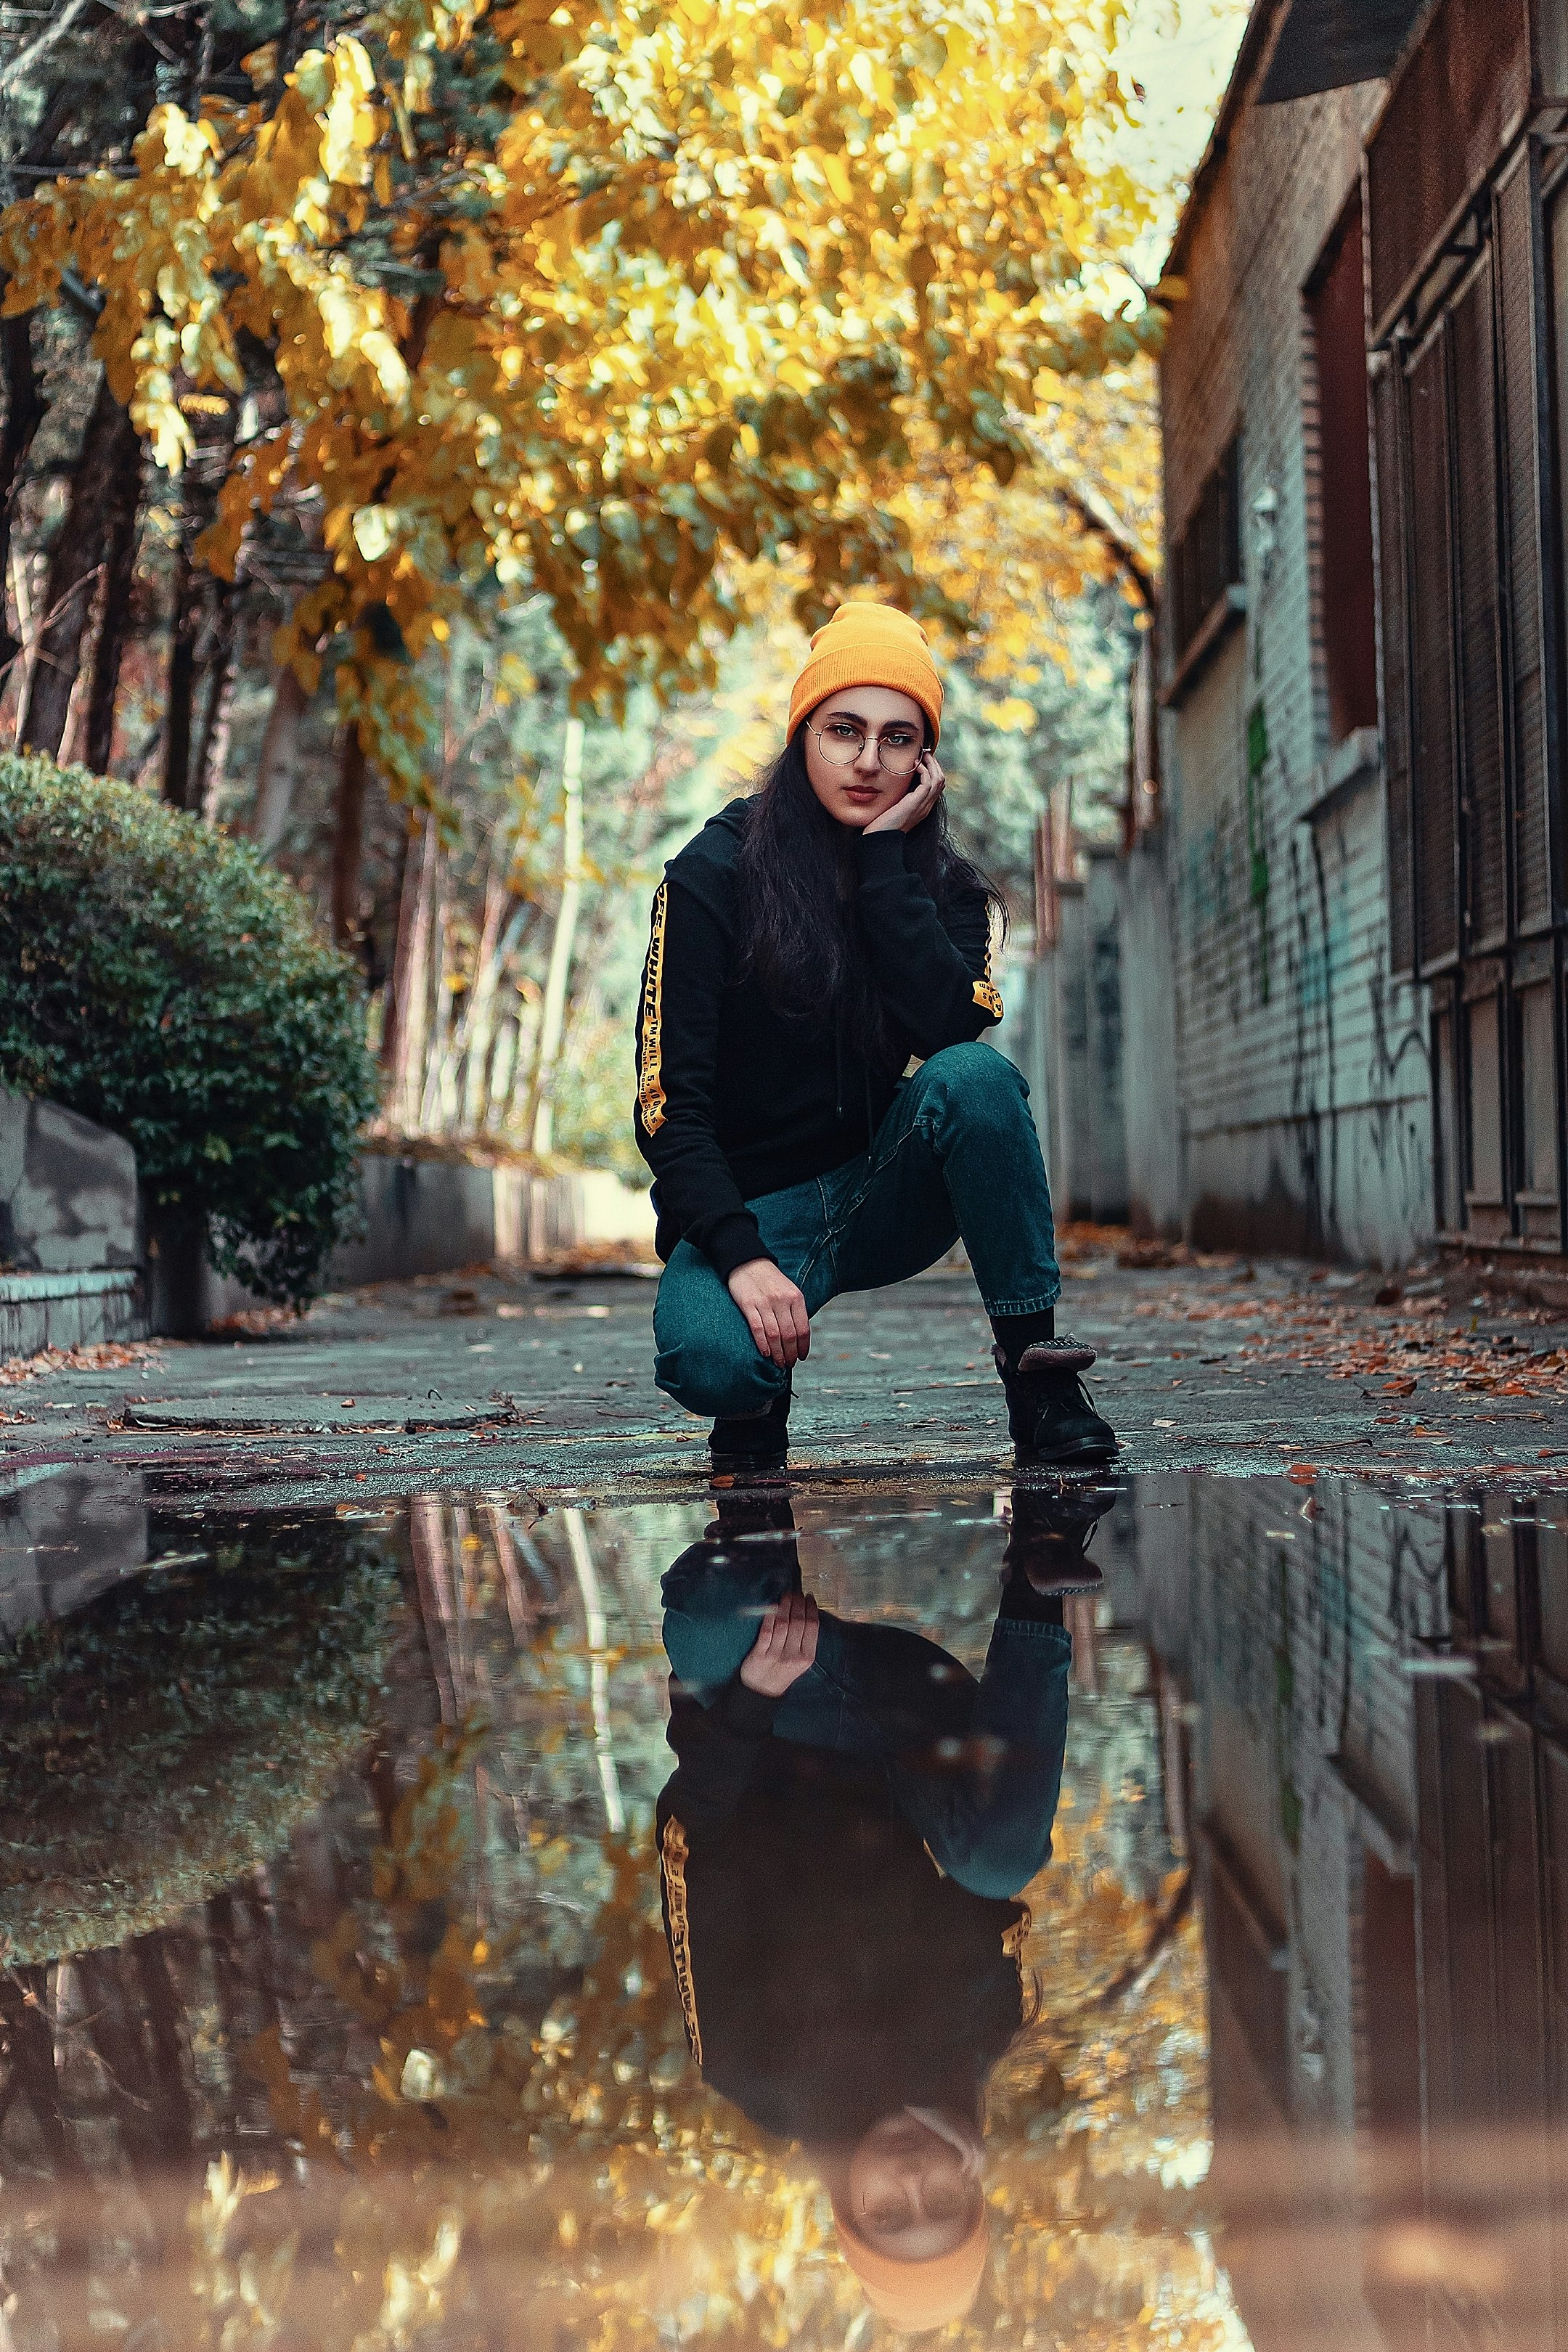 woman in black jacket, yellow beanie hat, and blue jeans kneeling on ground